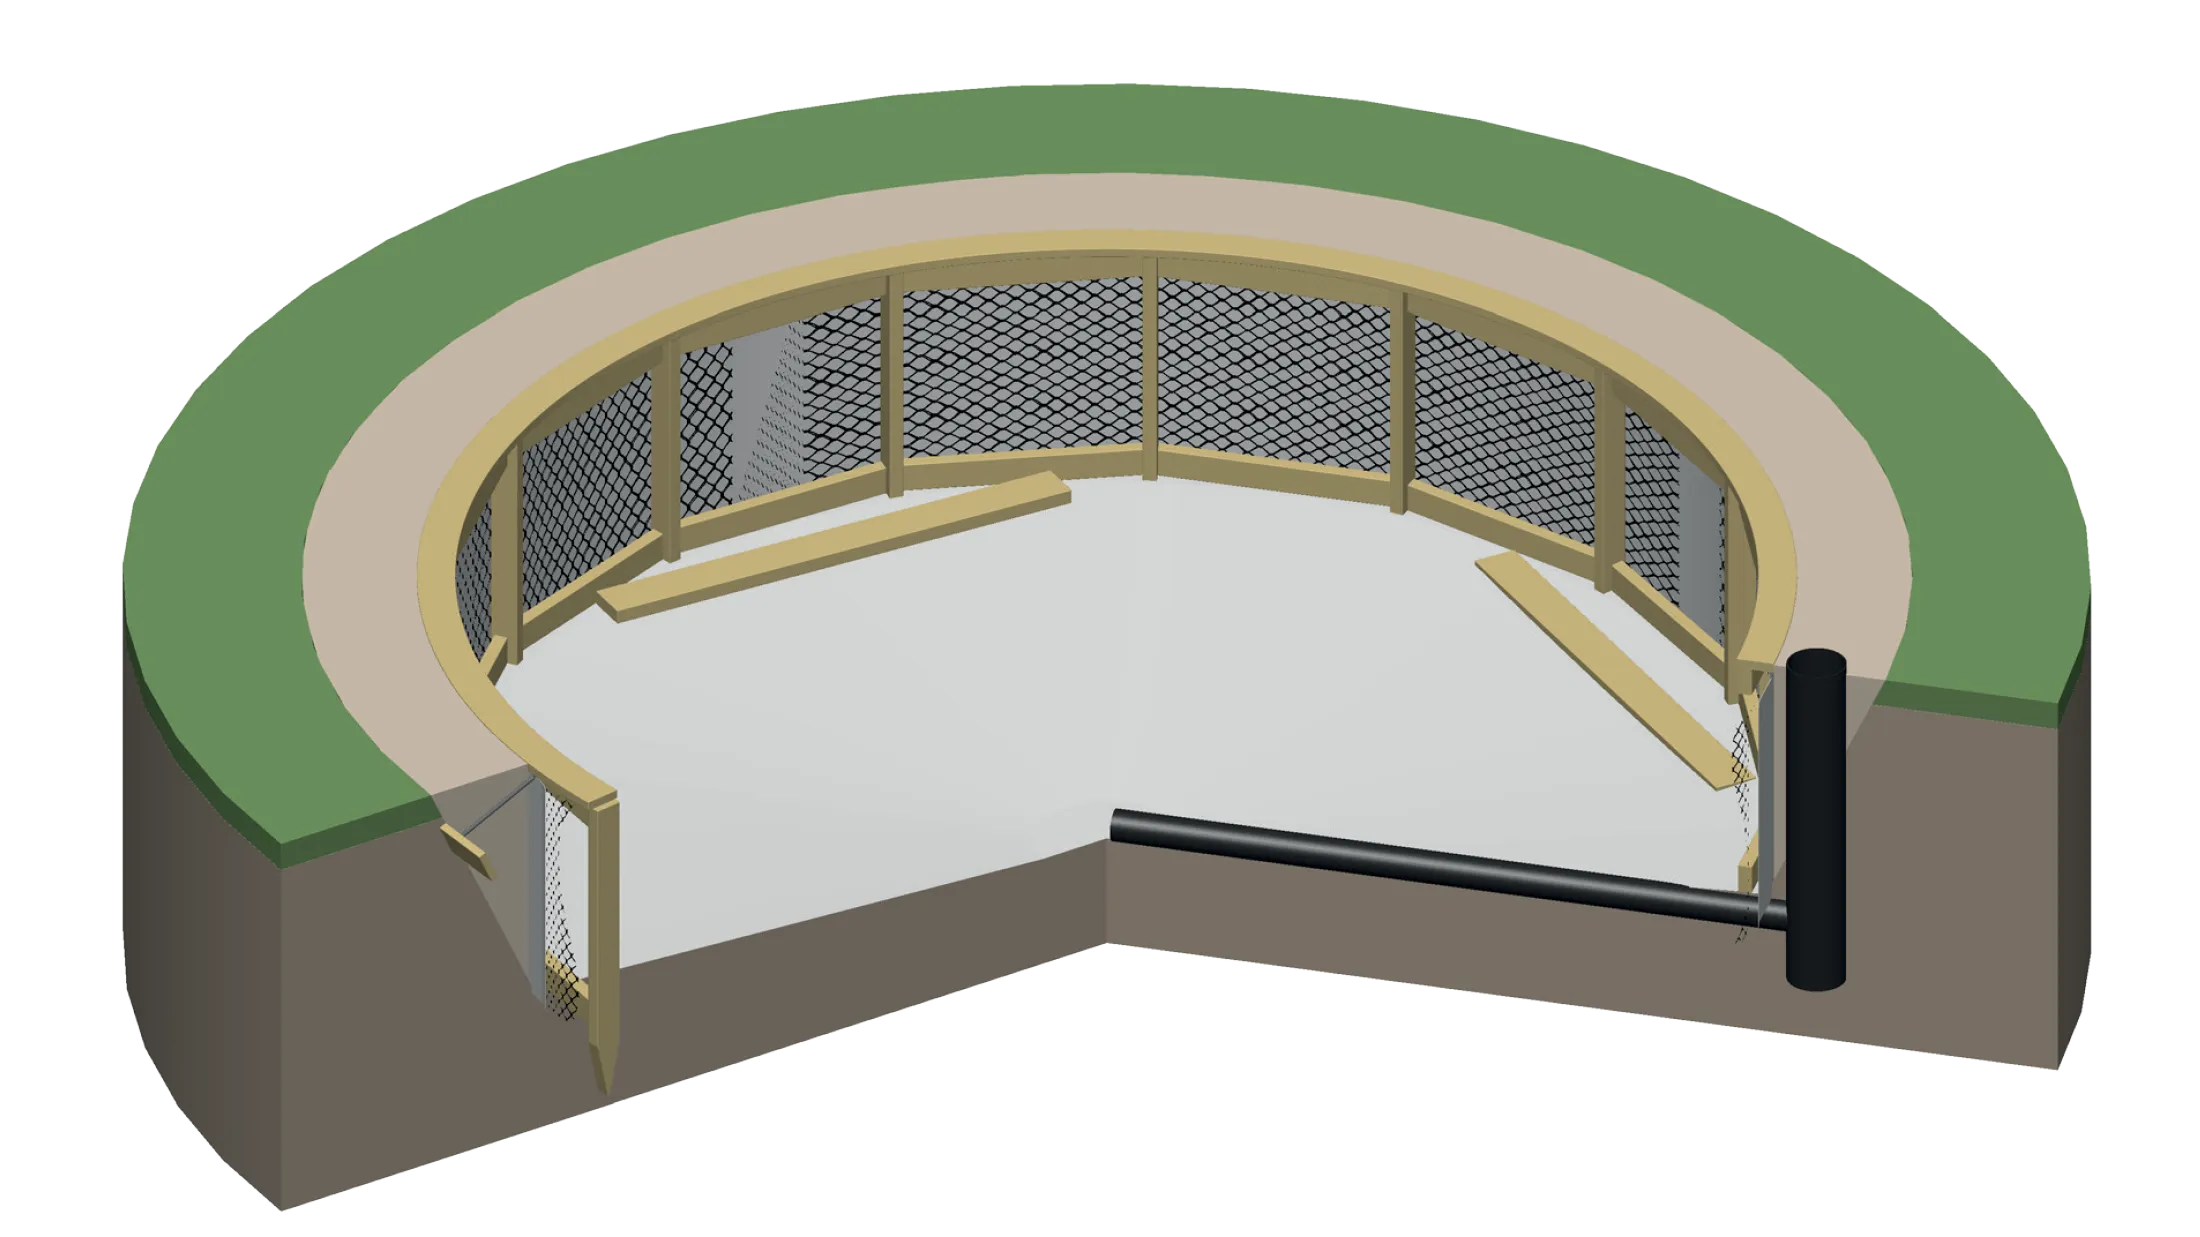 Cross-sectional view of a round trampoline's in-ground basis.